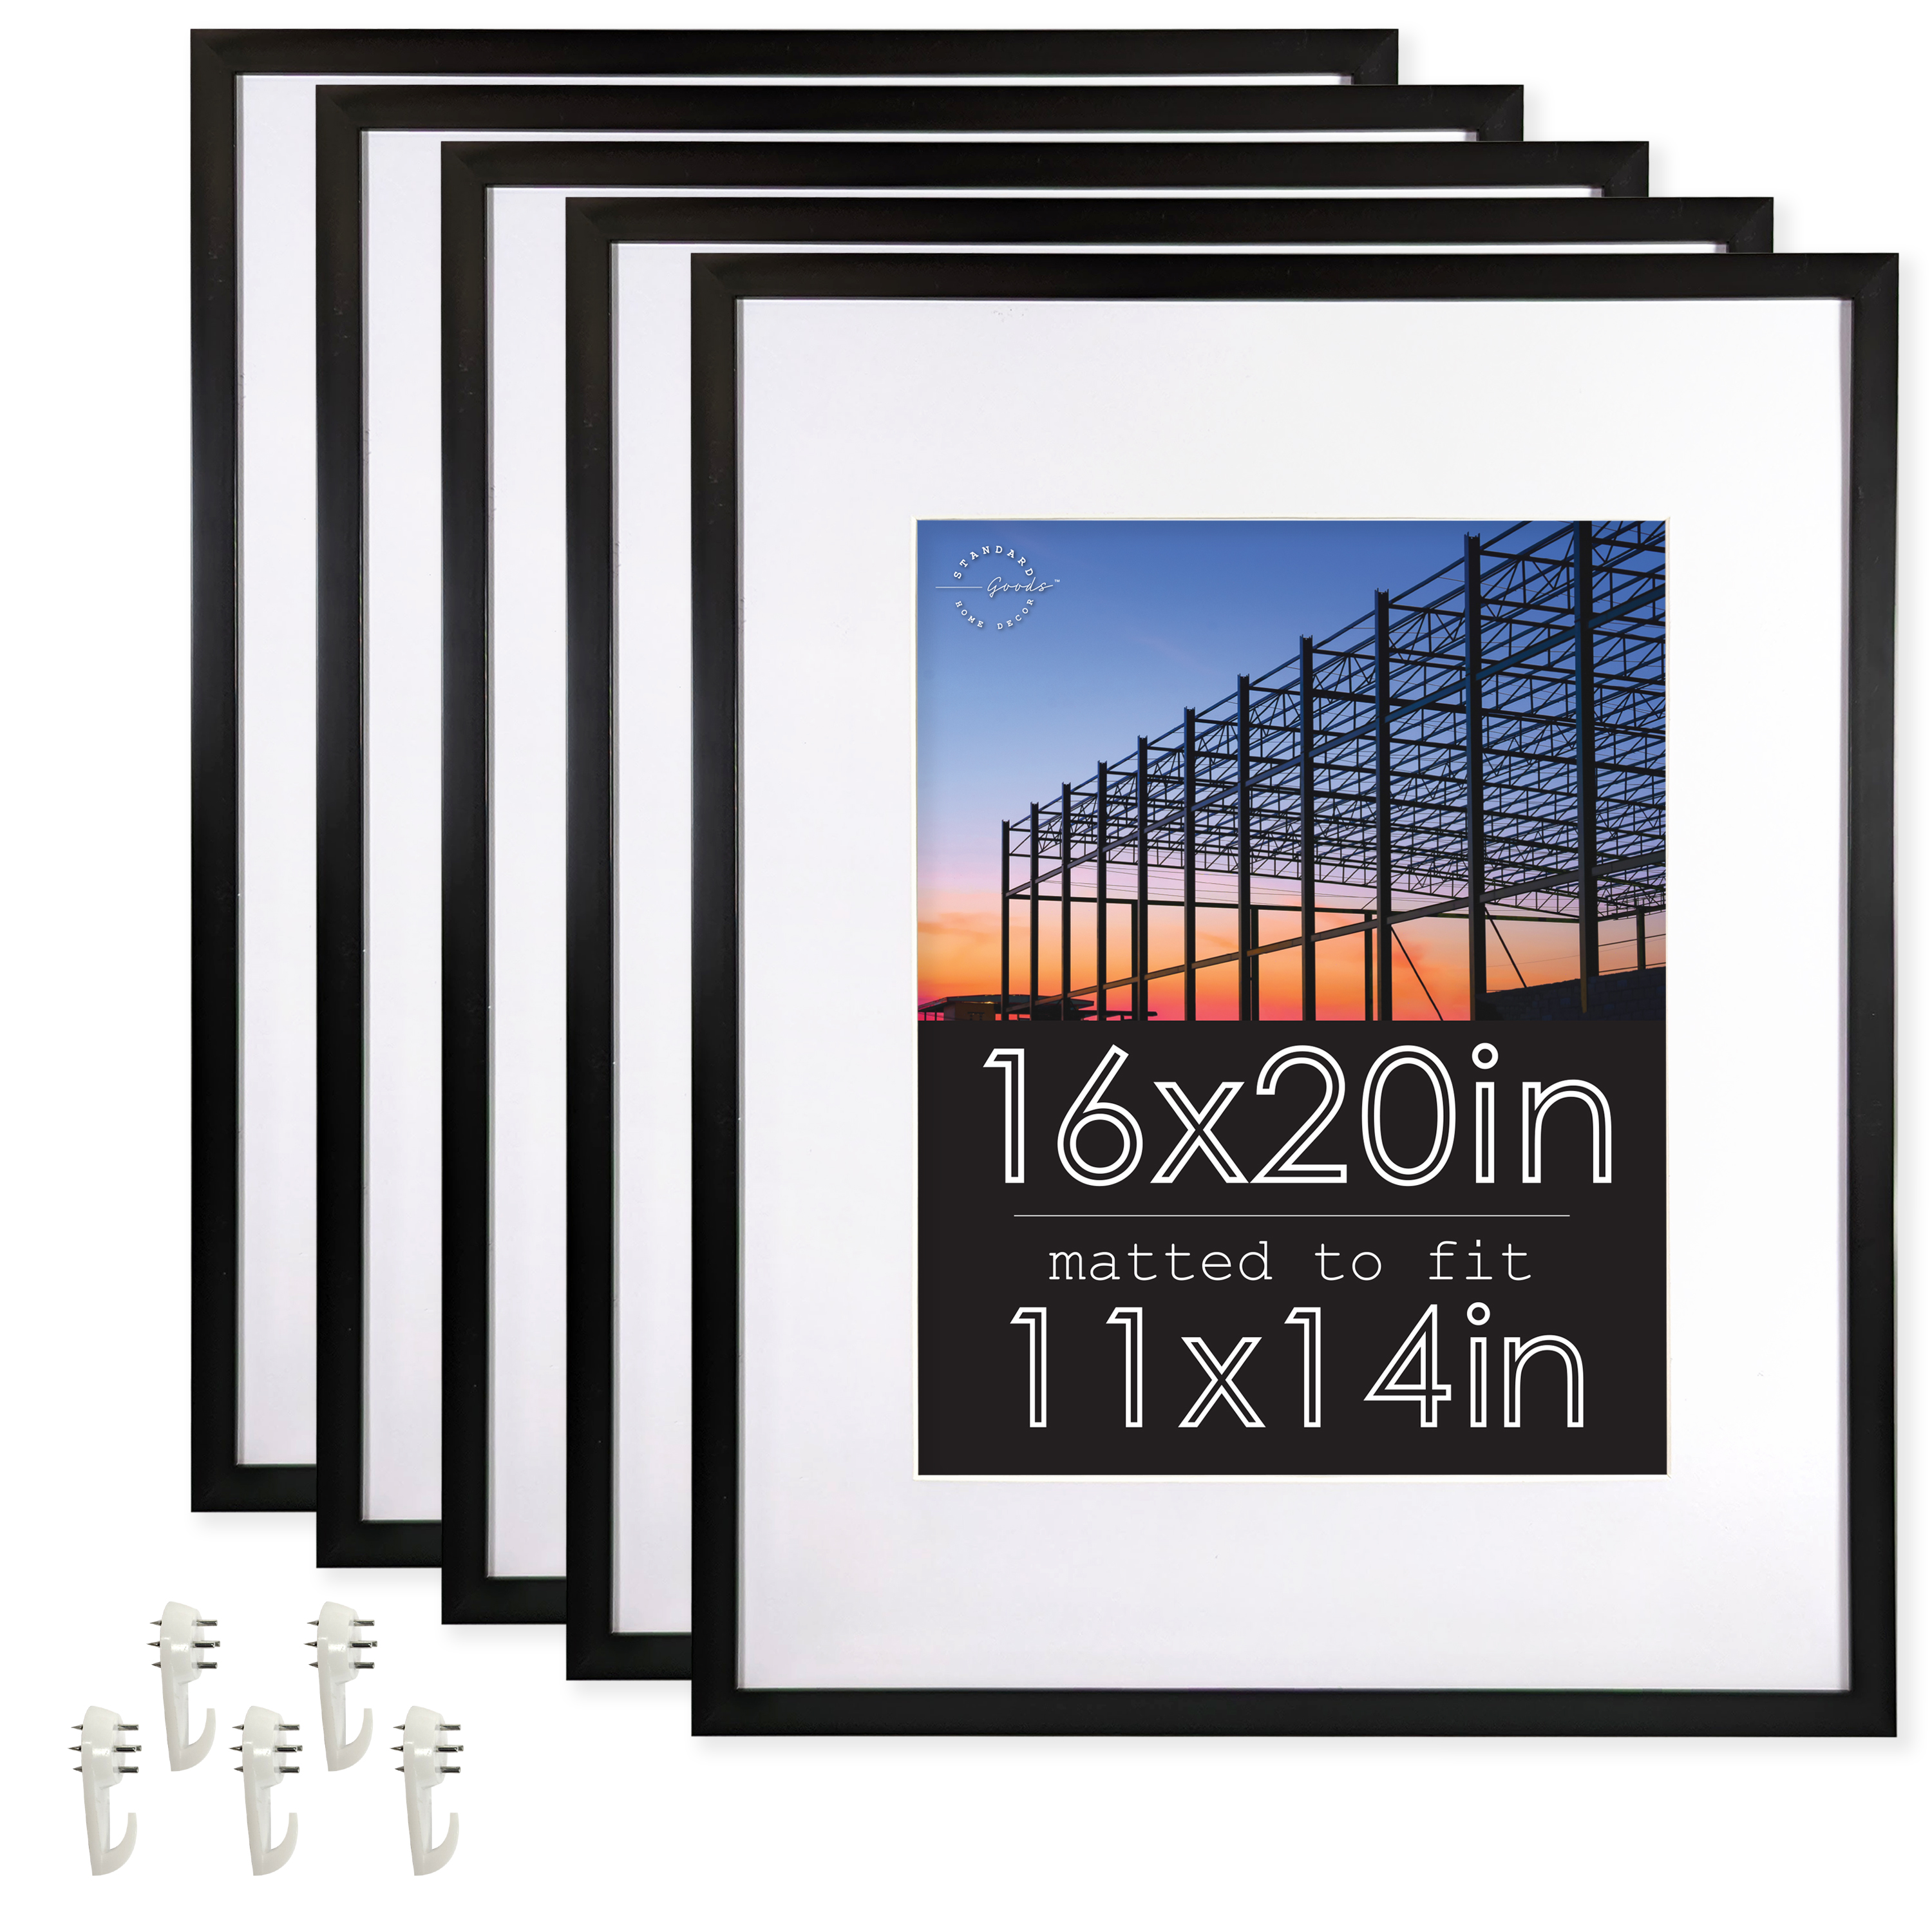 Standard Goods Home Décor Linear Picture Frame 5-Pack, Black for Wall or Table, Horizontal or Vertical Display (16x20)